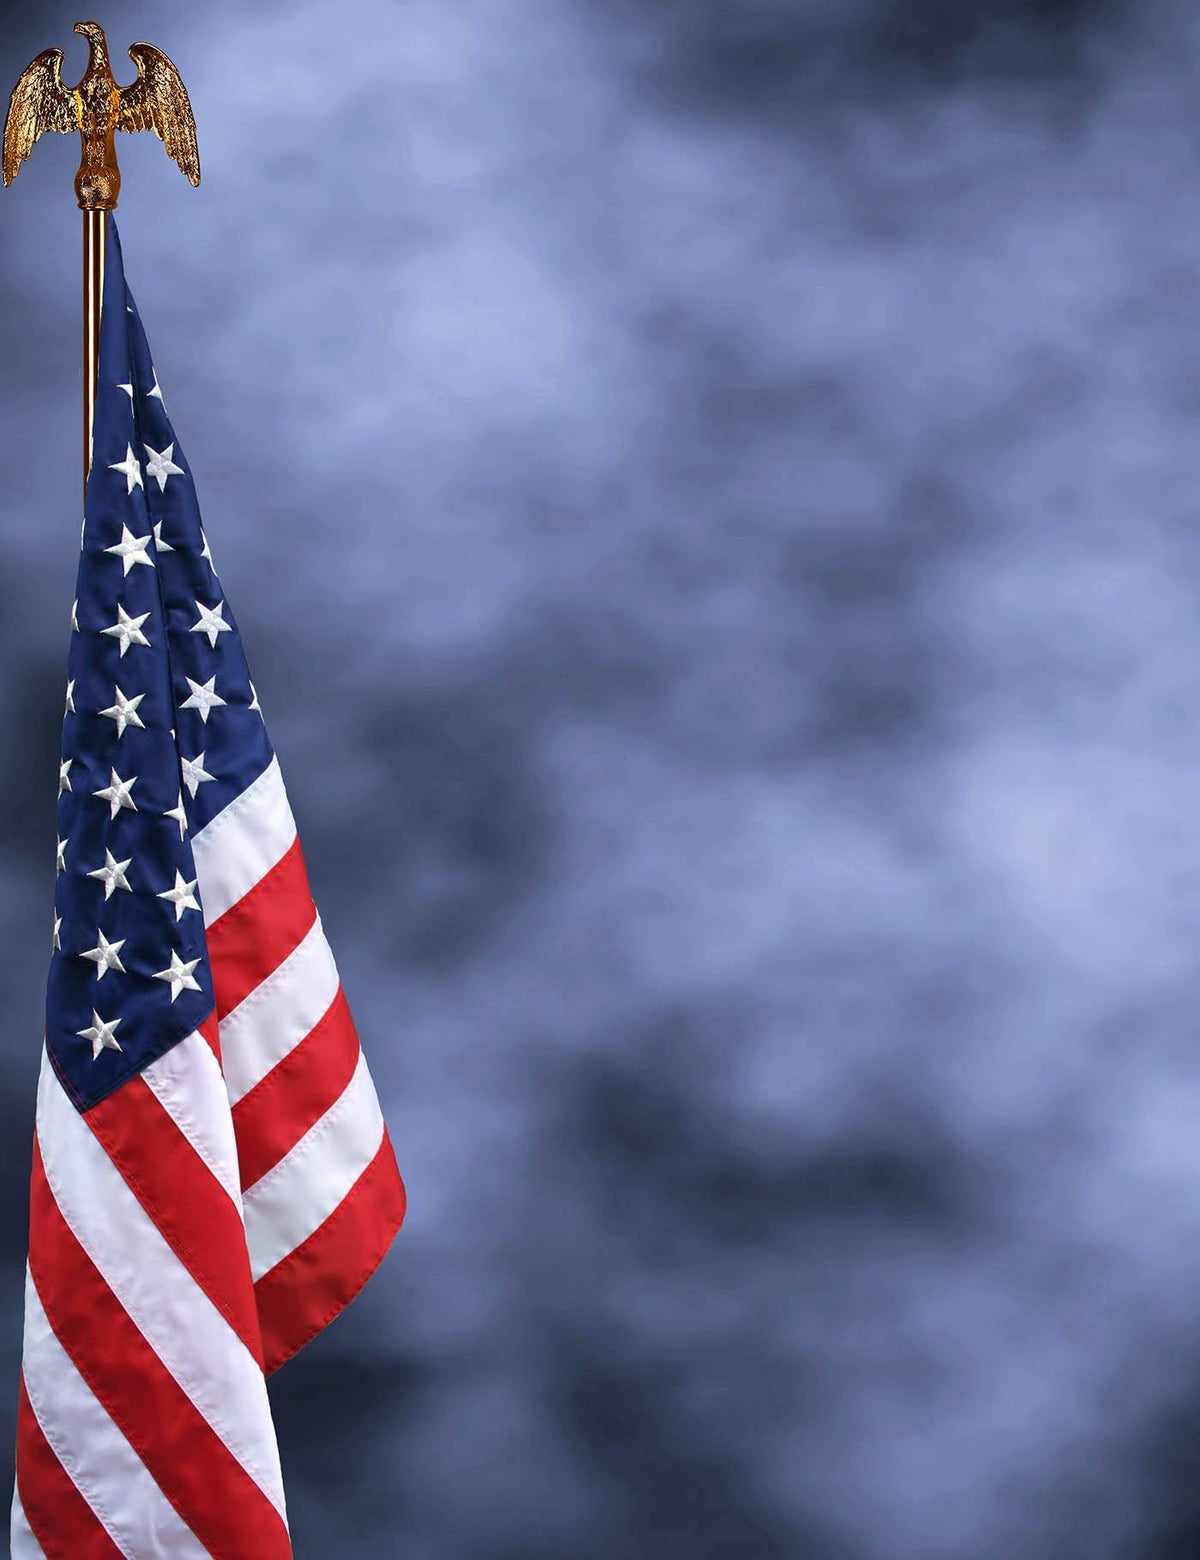 Abstract Gray Purple With American Flag Photography Backdrop J-0620 Shopbackdrop